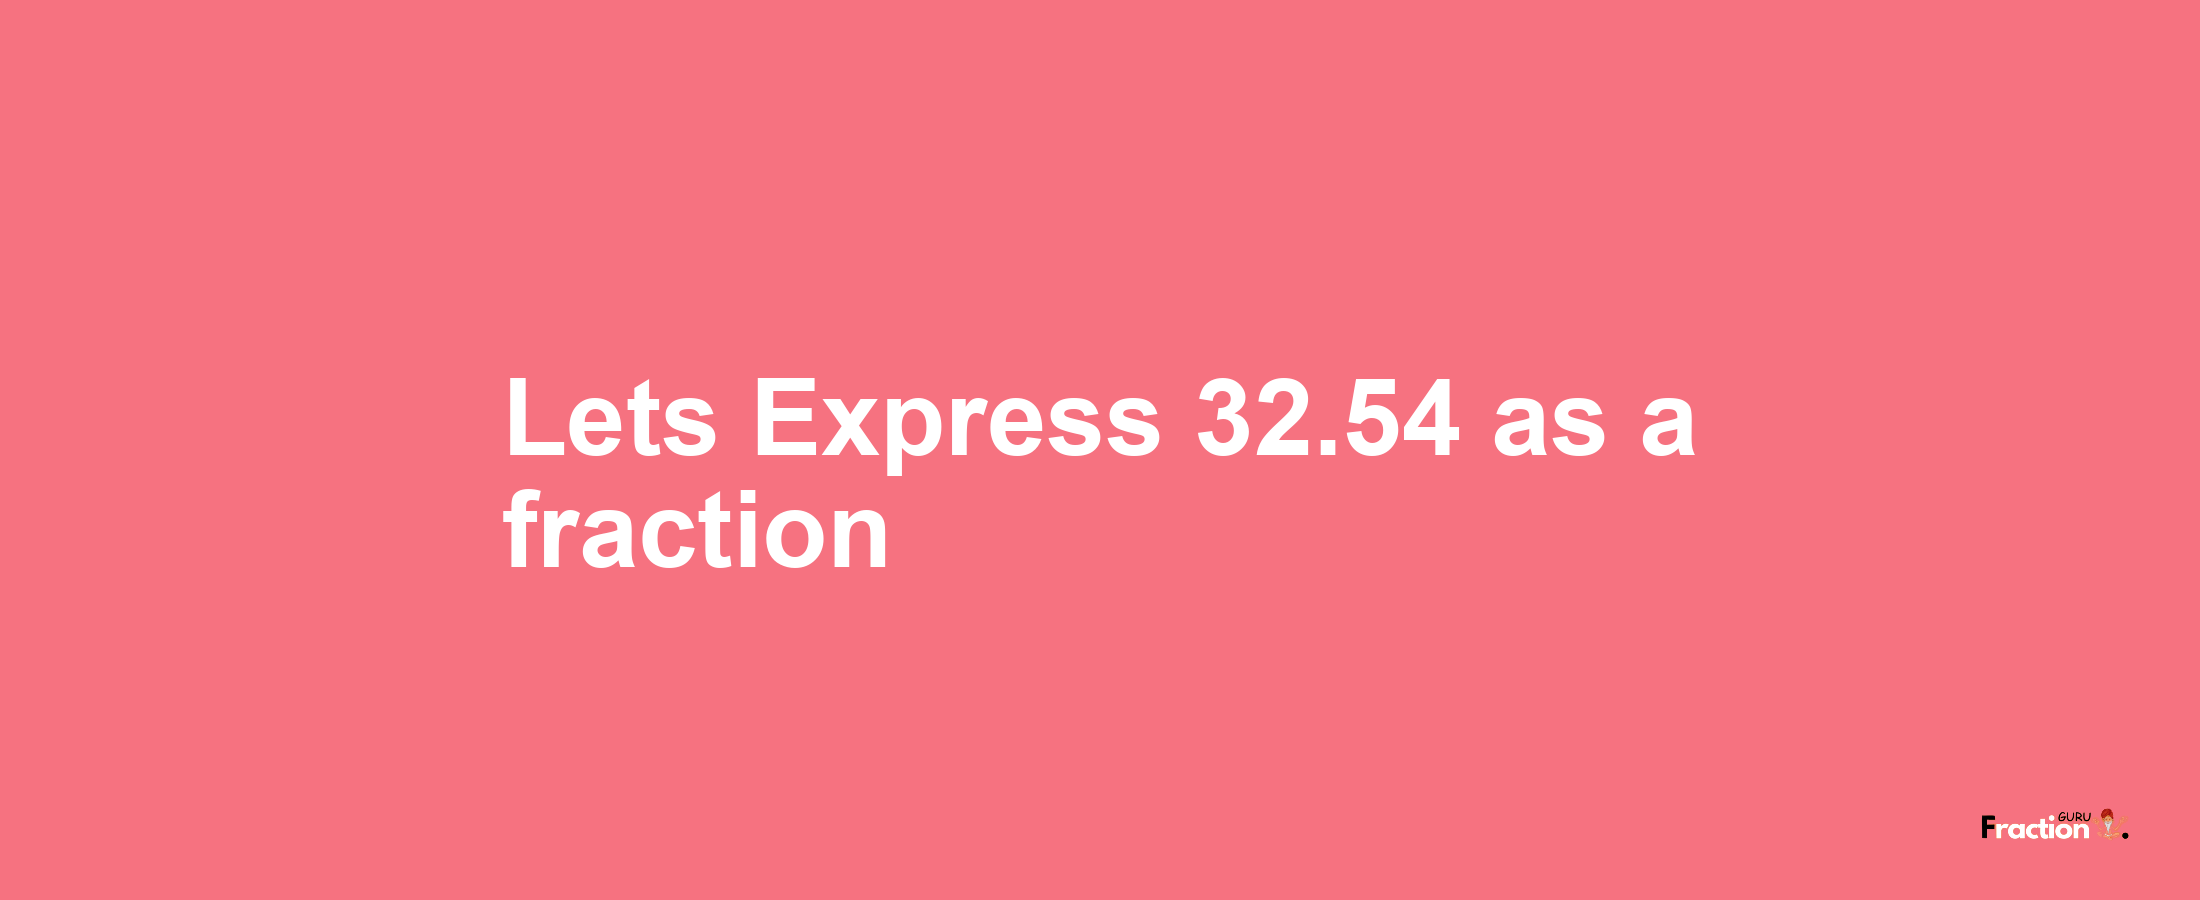 Lets Express 32.54 as afraction